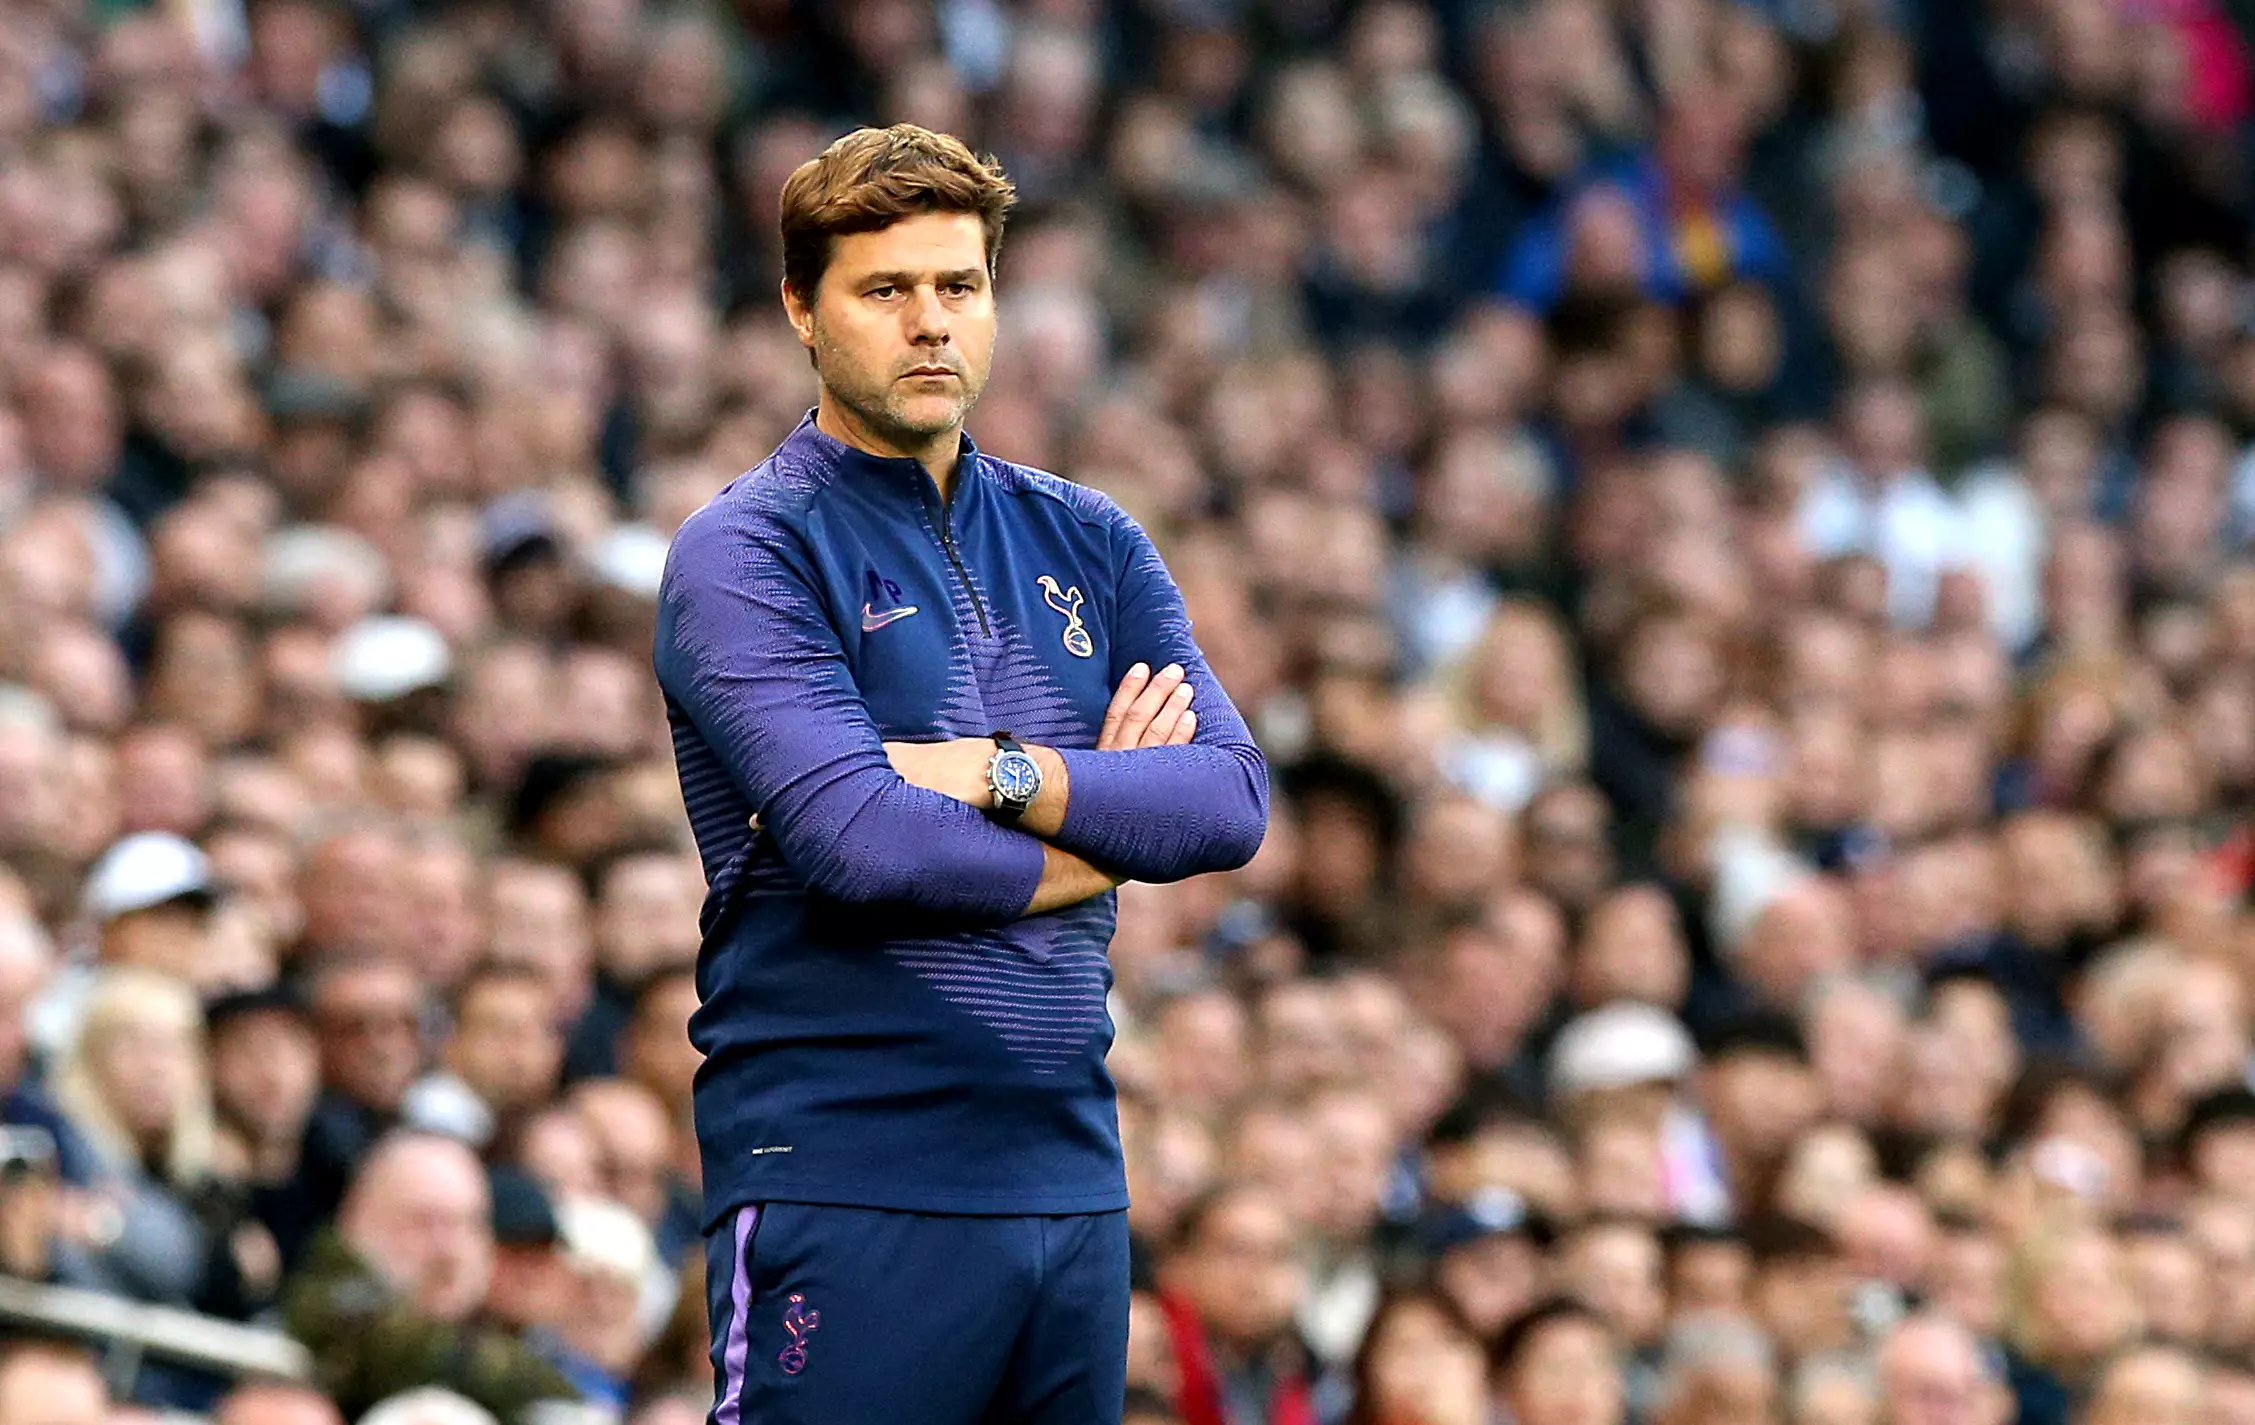 Pochettino has been out of work since Jose Mourinho replaced him at Spurs. Image: PA Images